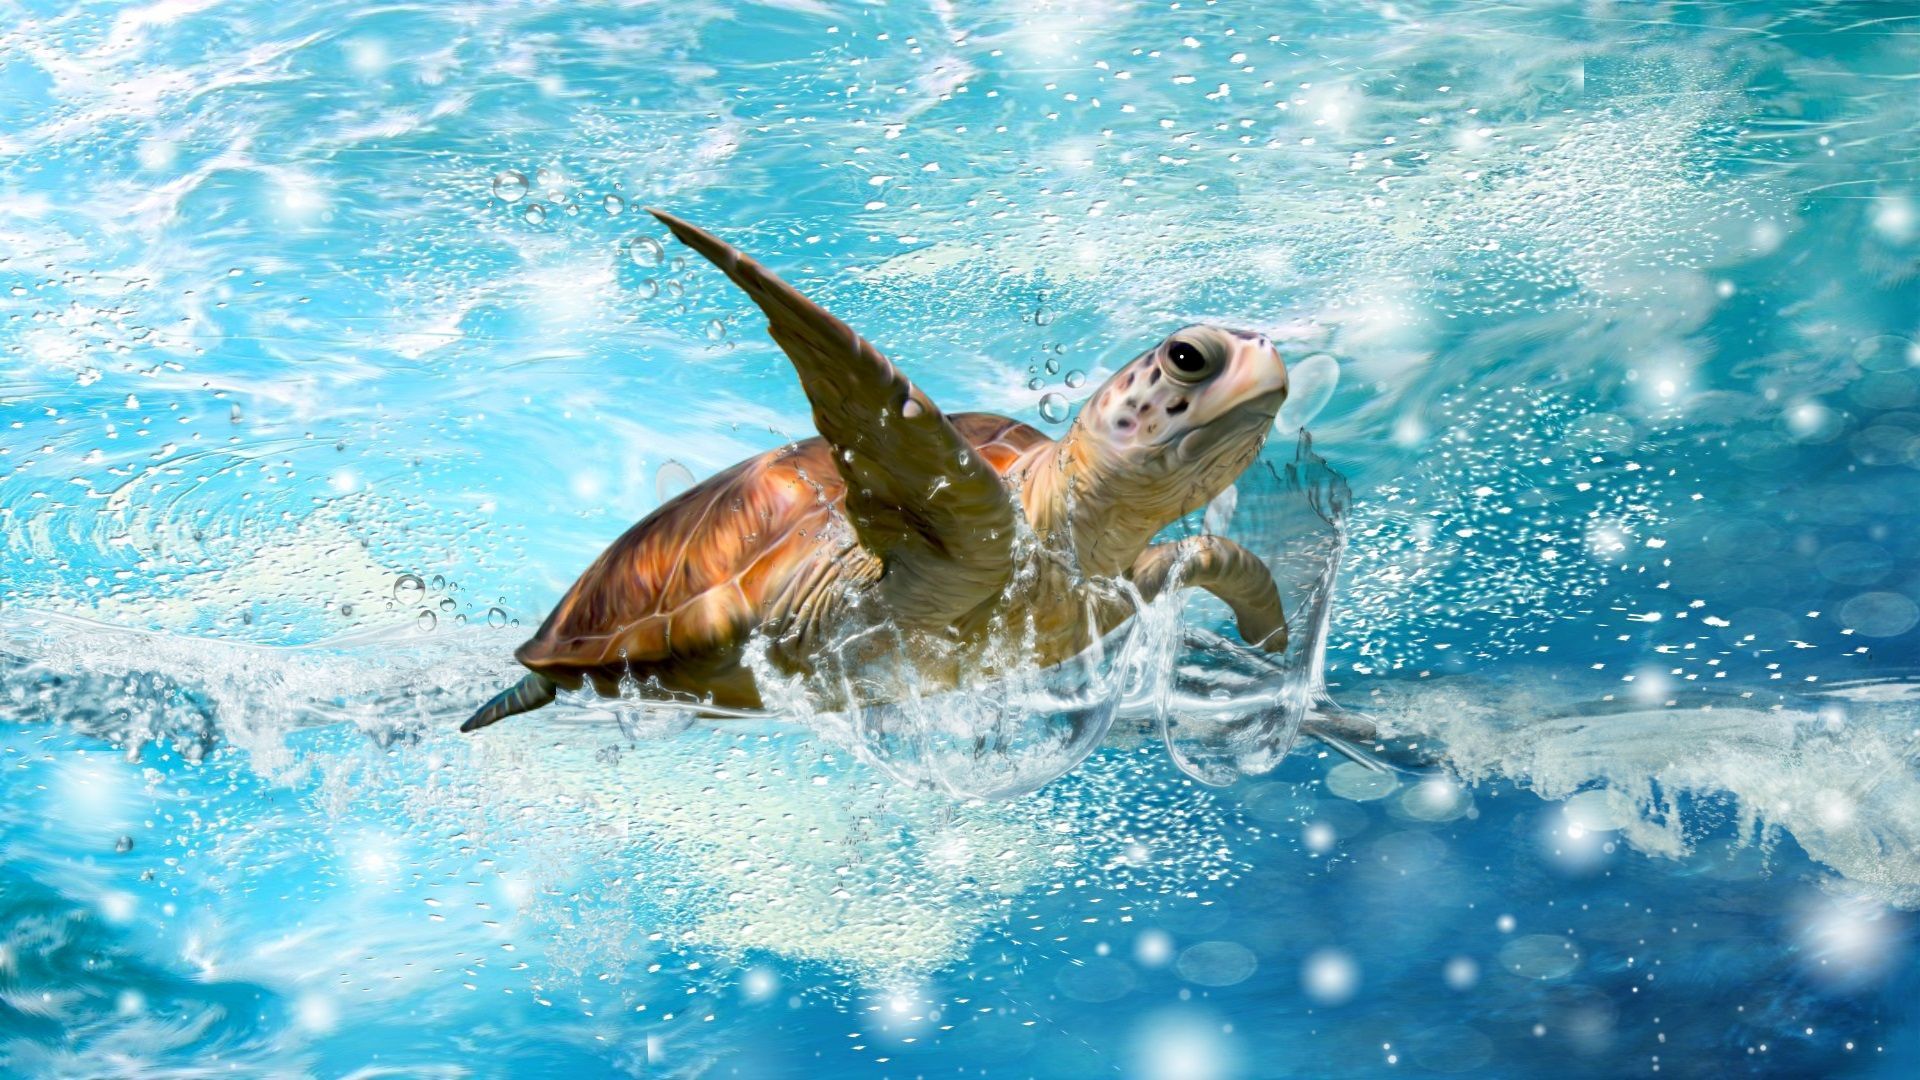 6 Sea Turtle HD Wallpapers | Backgrounds - Wallpaper Abyss